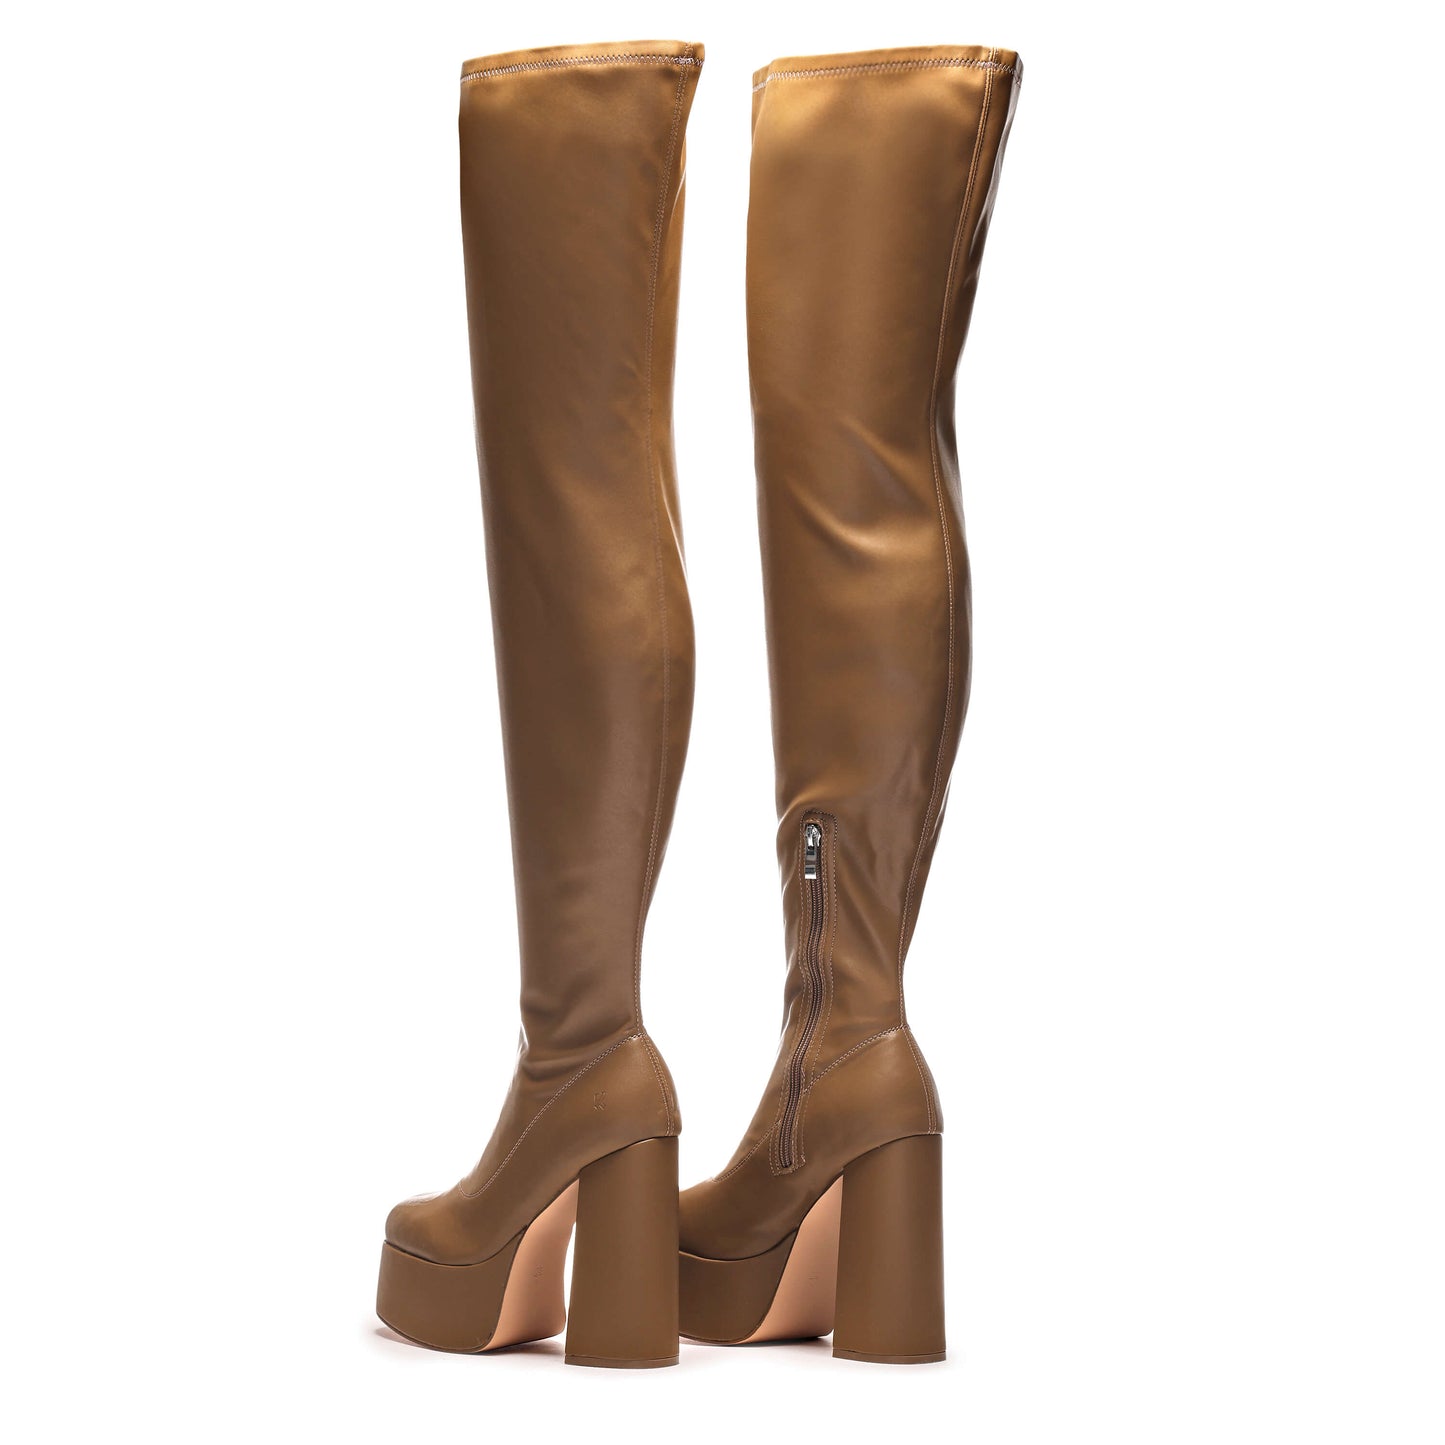 The Redemption Stretch Thigh High Boots - Khaki - Long Boots - KOI Footwear - Khaki - Back View